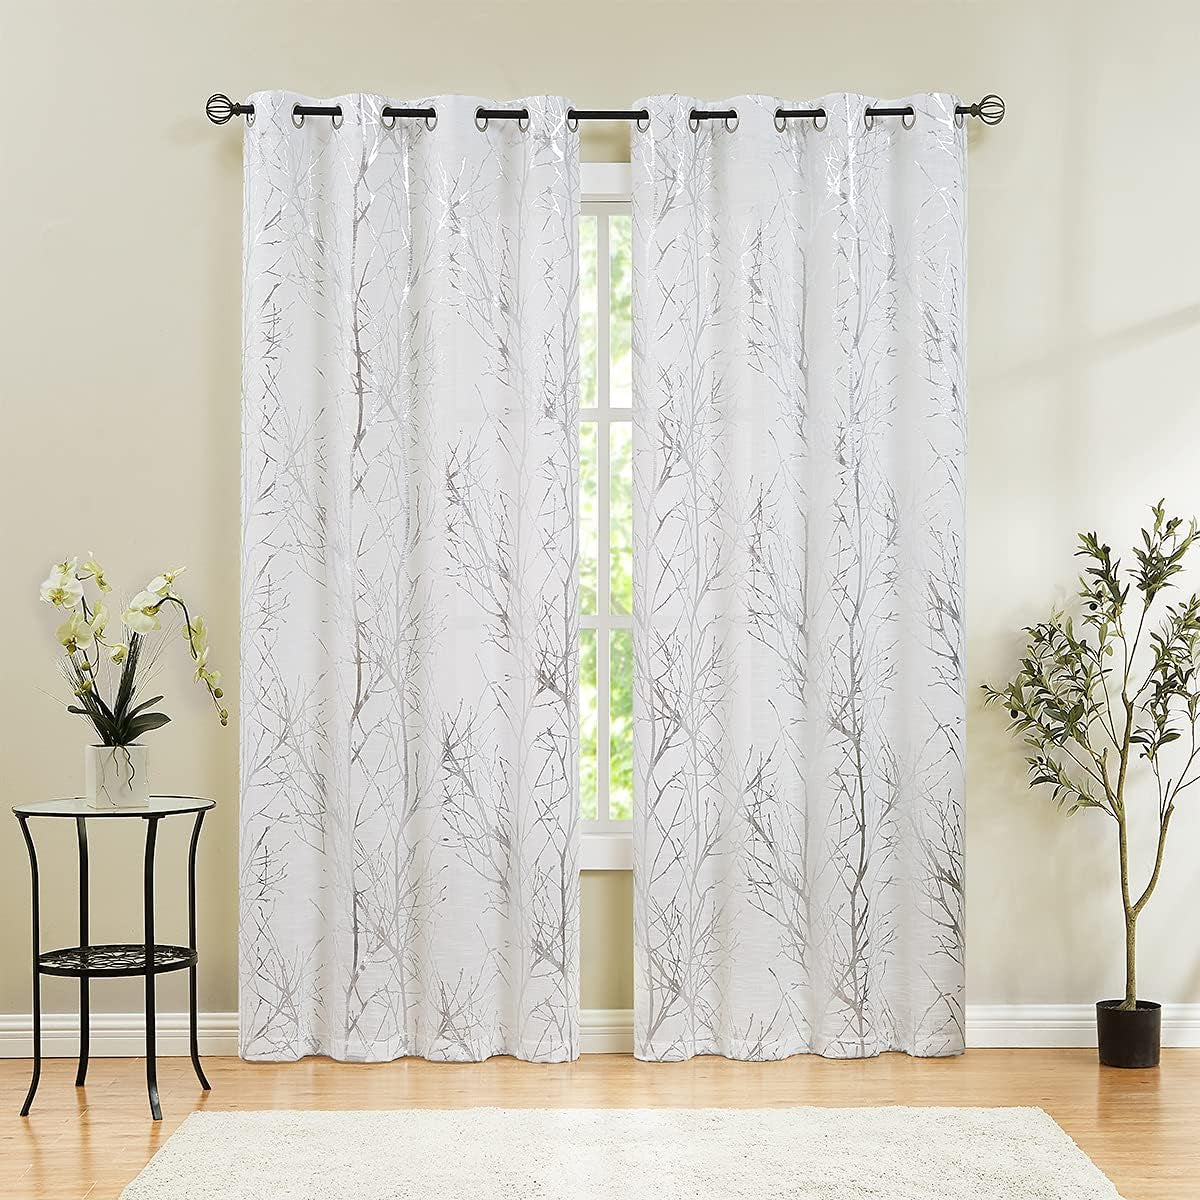 FMFUNCTEX Blue White Curtains for Kitchen Living Room 72“ Grey Tree Branches Print Curtain Set for Small Windows Linen Textured Semi-Sheer Drapes for Bedroom Grommet Top, 2 Panels  Fmfunctex Semi-Sheer: White + Foil Silver 50" X 84" |2Pcs 